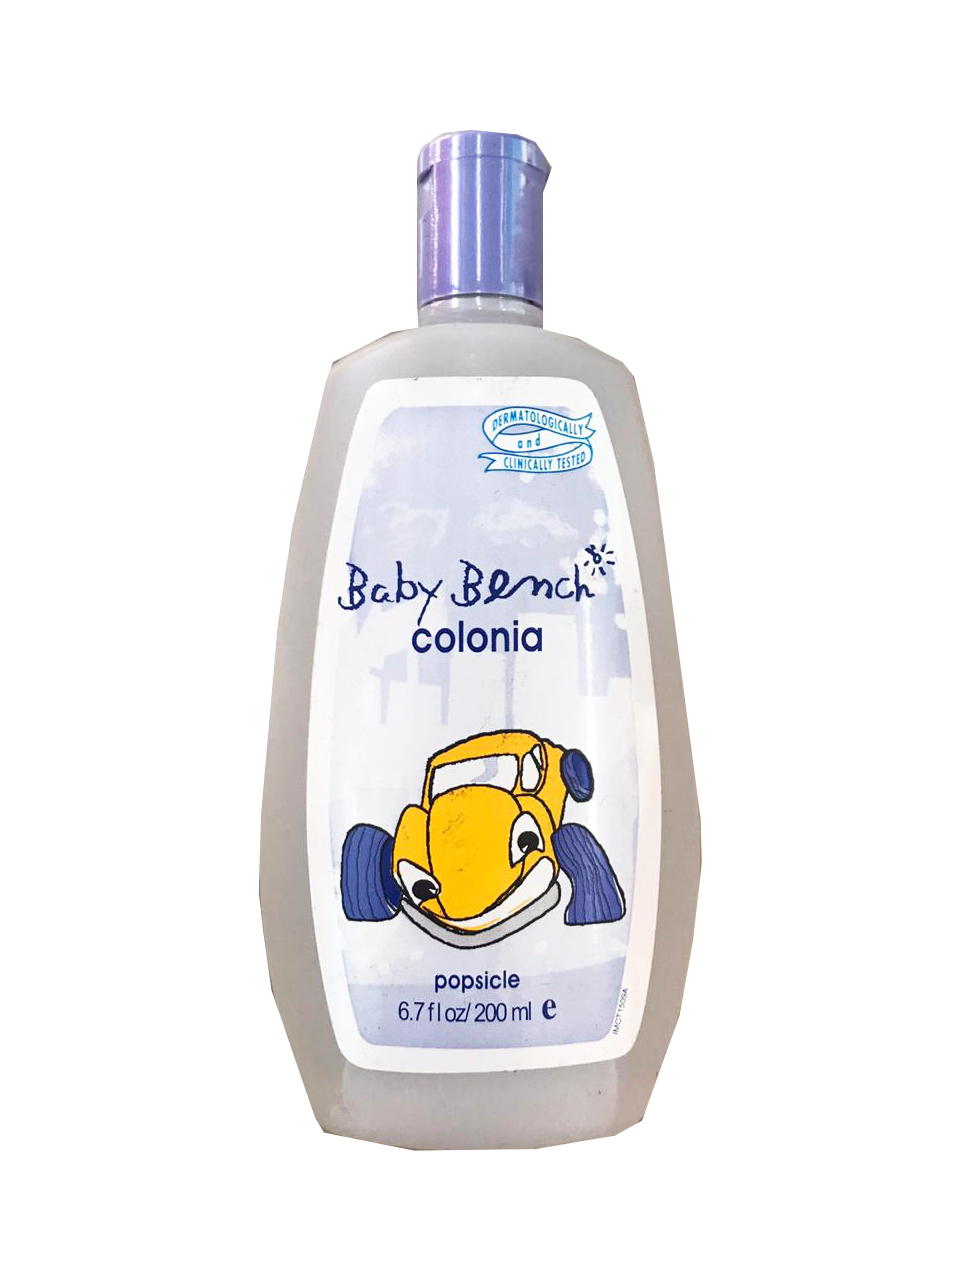 Baby Bench Colonia Popsicle 200ml